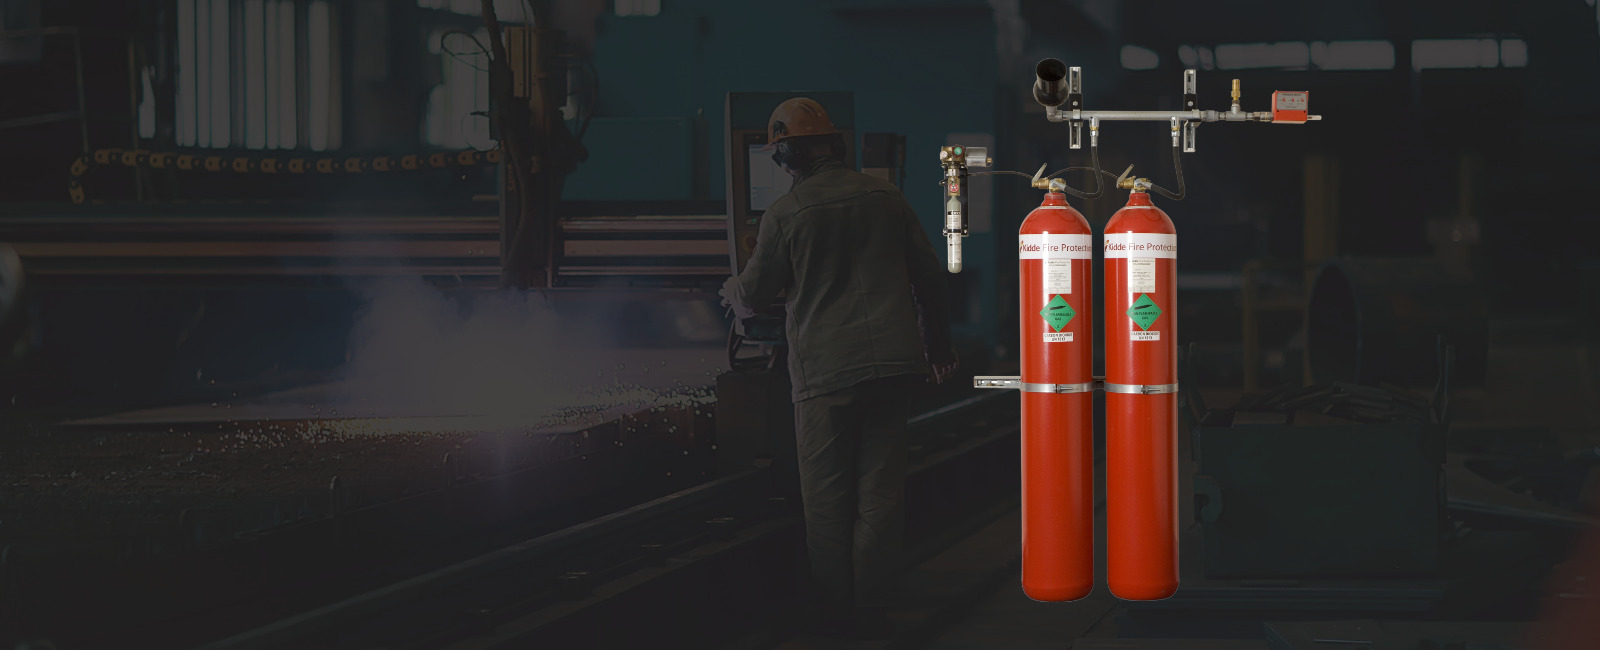 Kidde CO2 Fire Suppression Systems